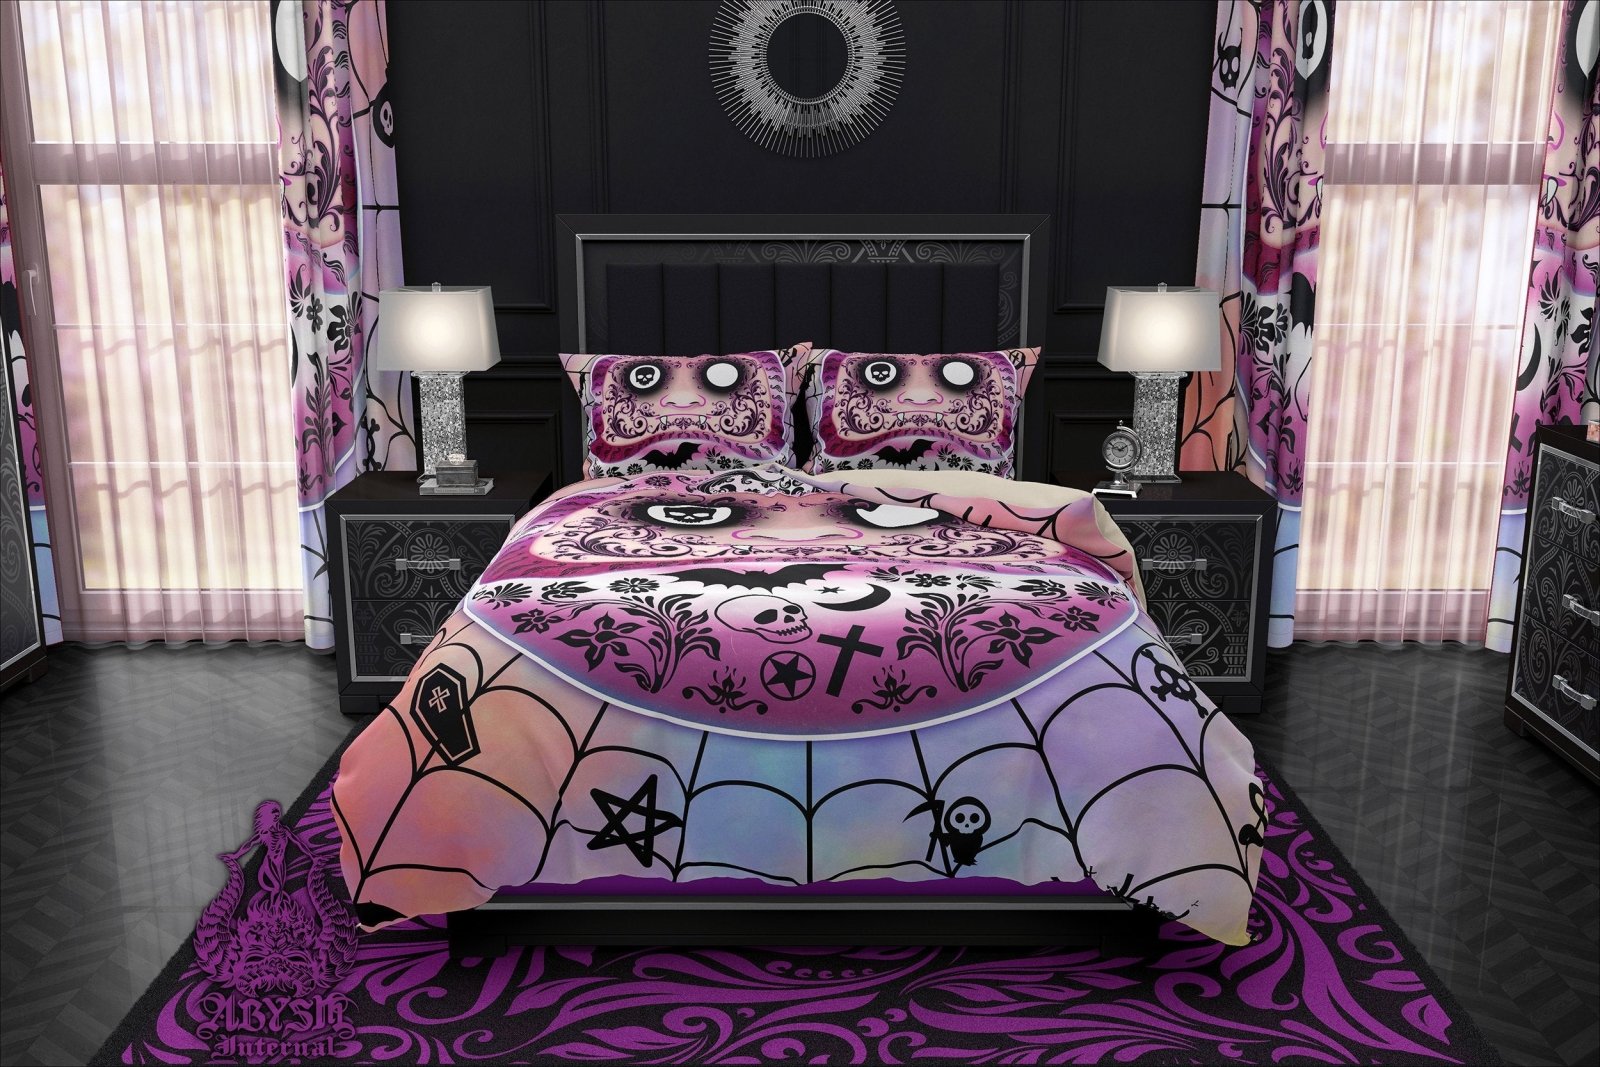 Daruma Bedding Set, Comforter and Duvet, Funny Japanese Pastel Goth Bed Cover and Bedroom Decor, King, Queen and Twin Size - Japanese Art - Abysm Internal